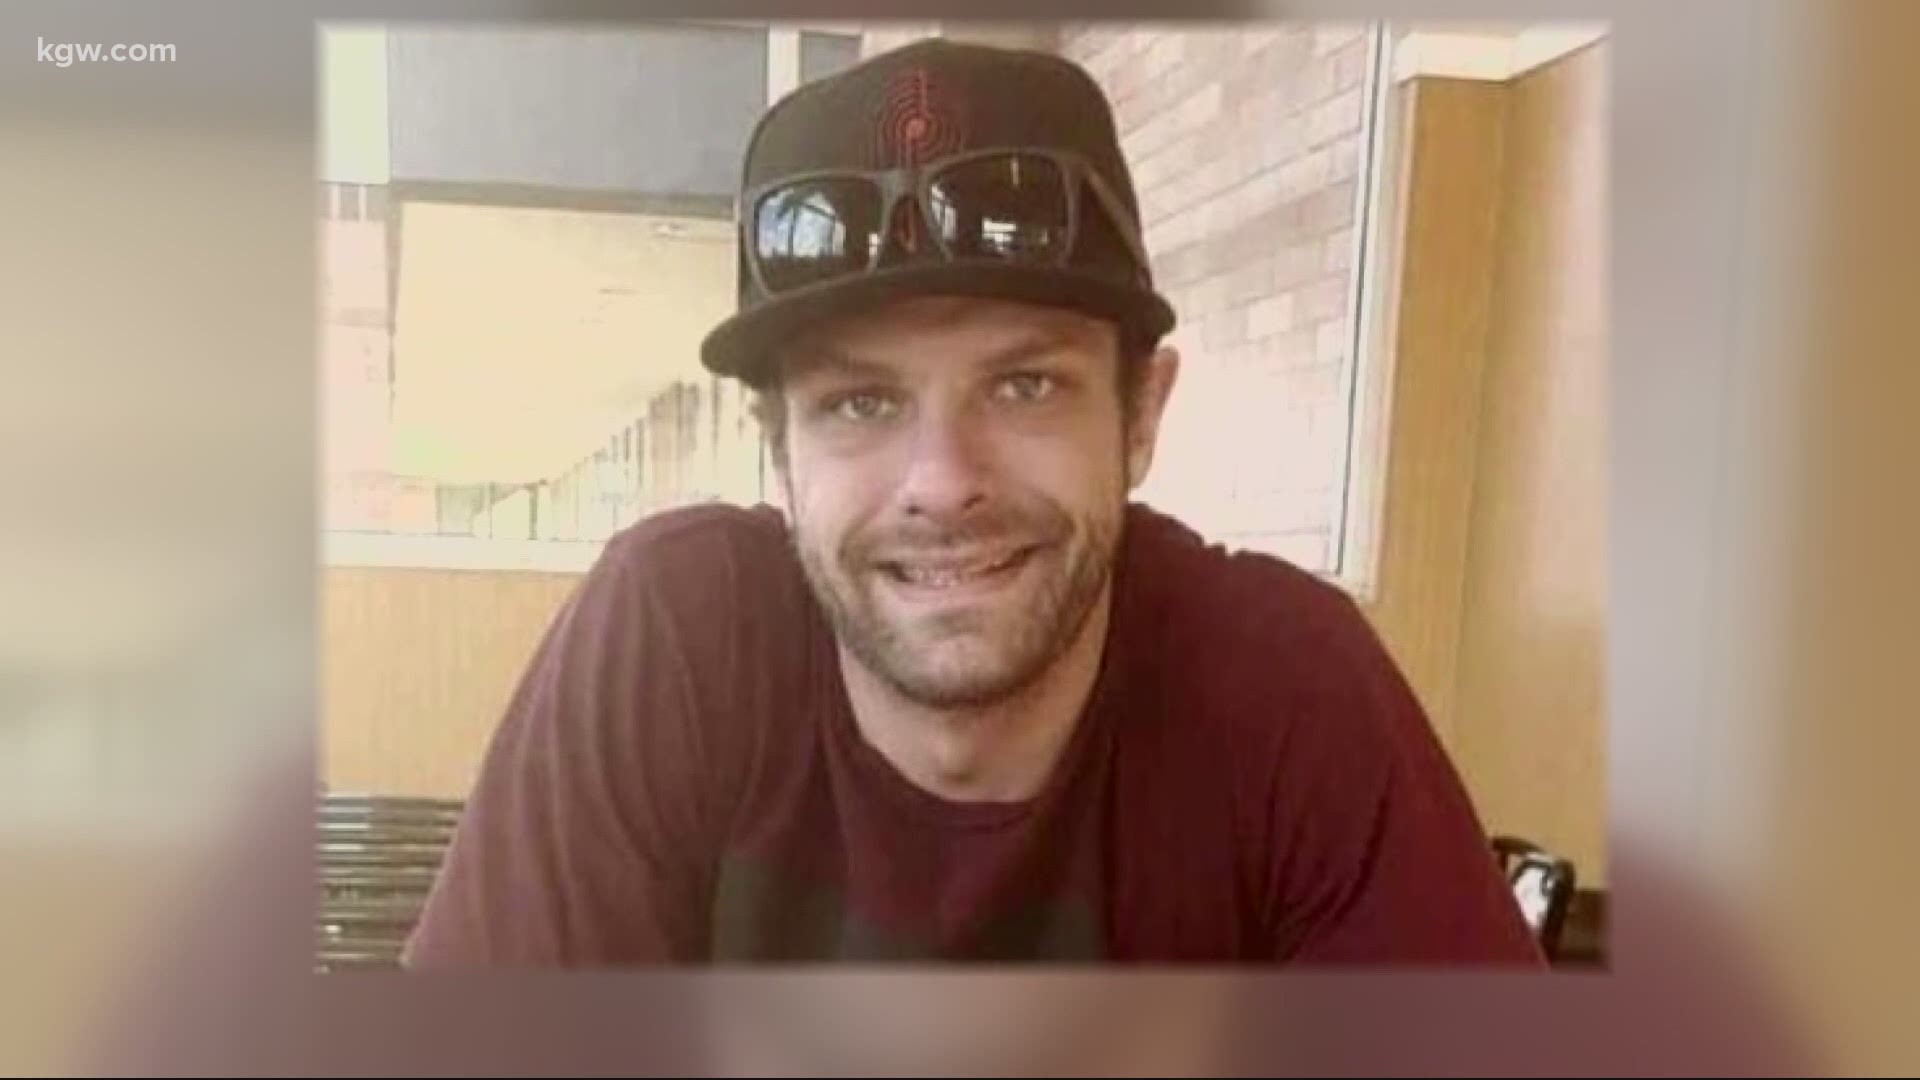 A 26-year-old who died in Oregon did not die of the coronavirus, a CDC test found. State health officials initially said his death was caused by COVID-19.